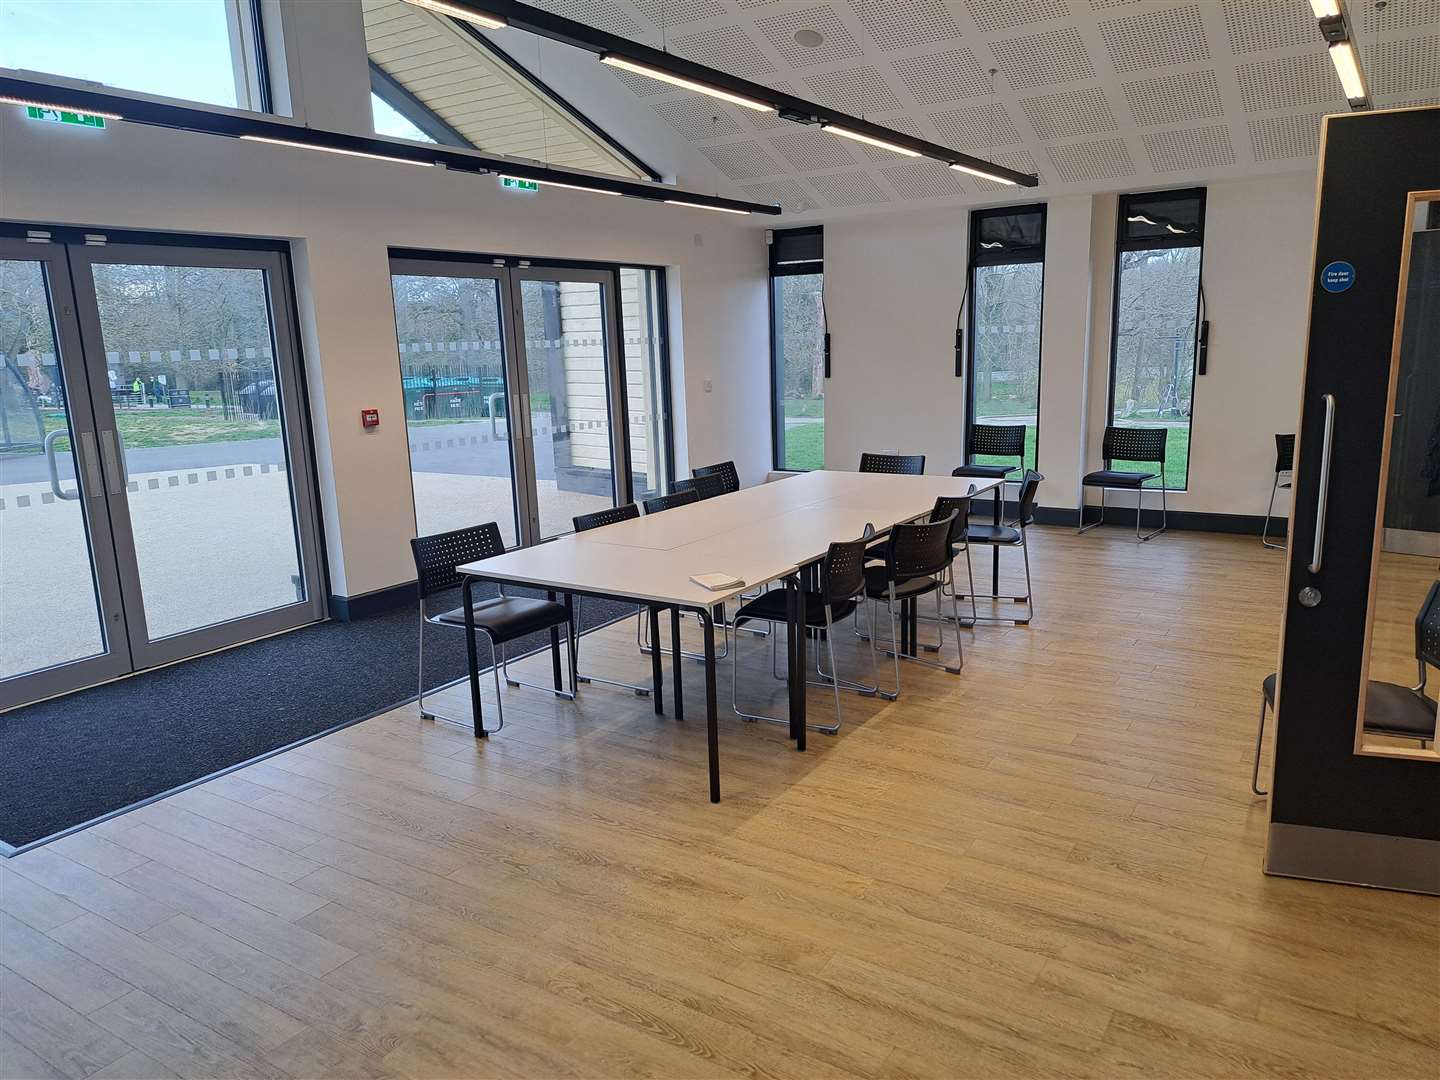 Inside the education room at Maidstone's Mote Park cafe complex